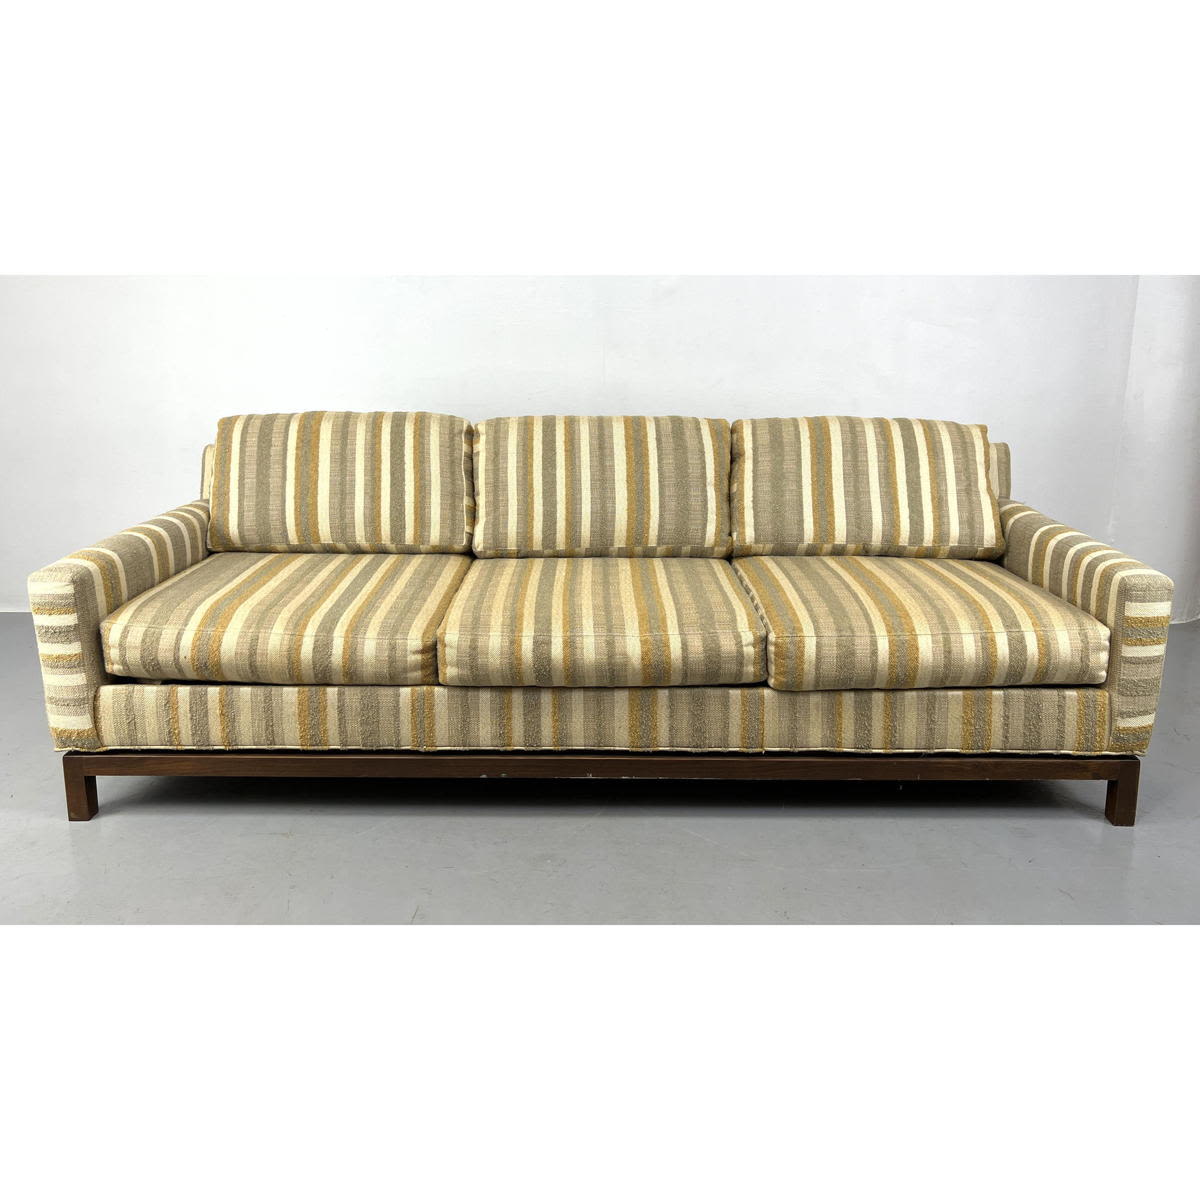 Selig Mid Century Modern Sofa Couch.